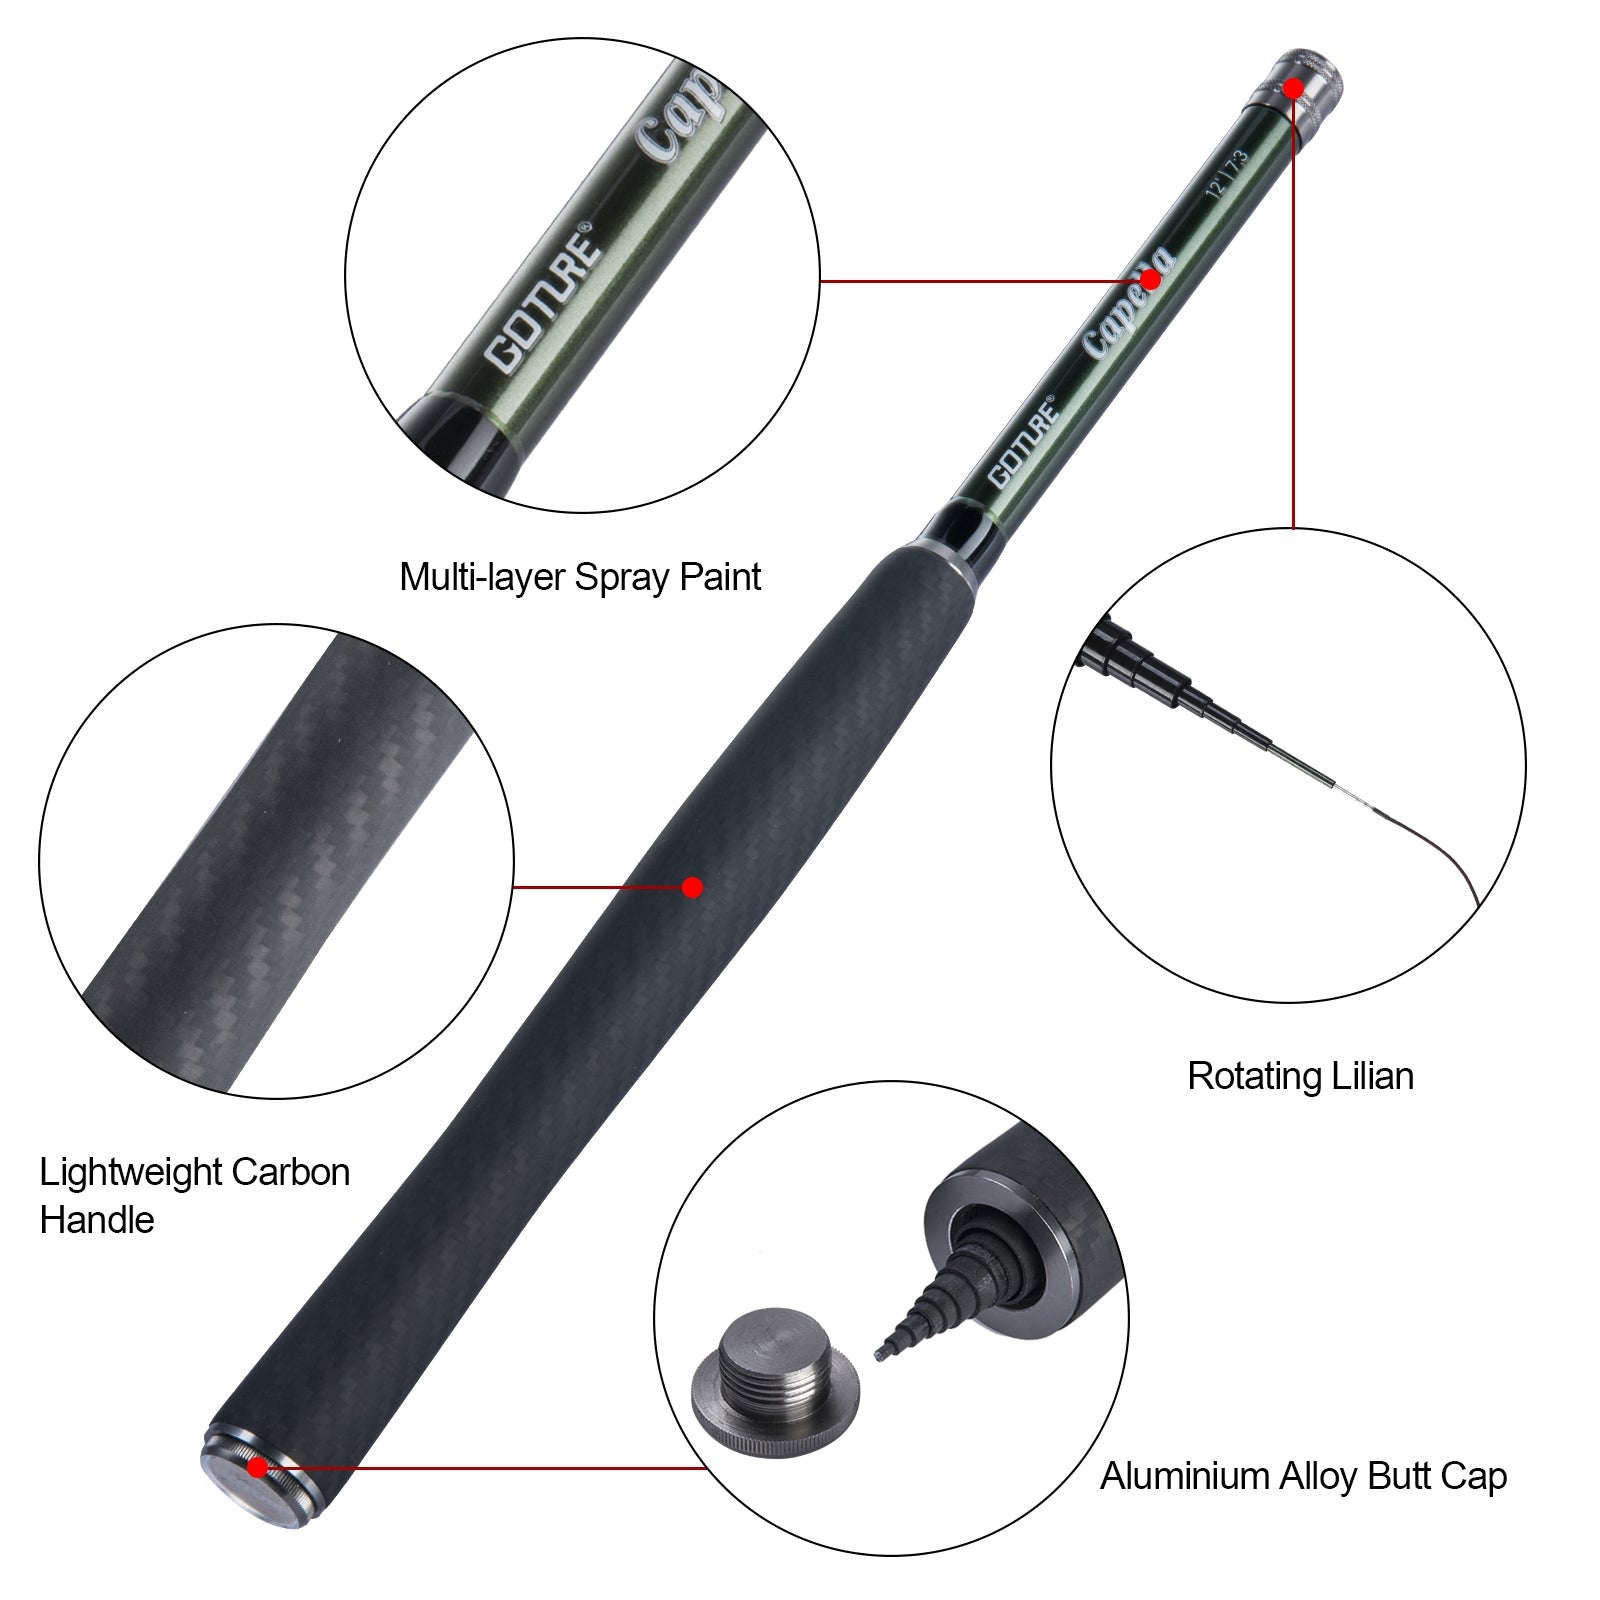 Goture Casting Fishing Rods - Travel Fishing Rods - Lightweight